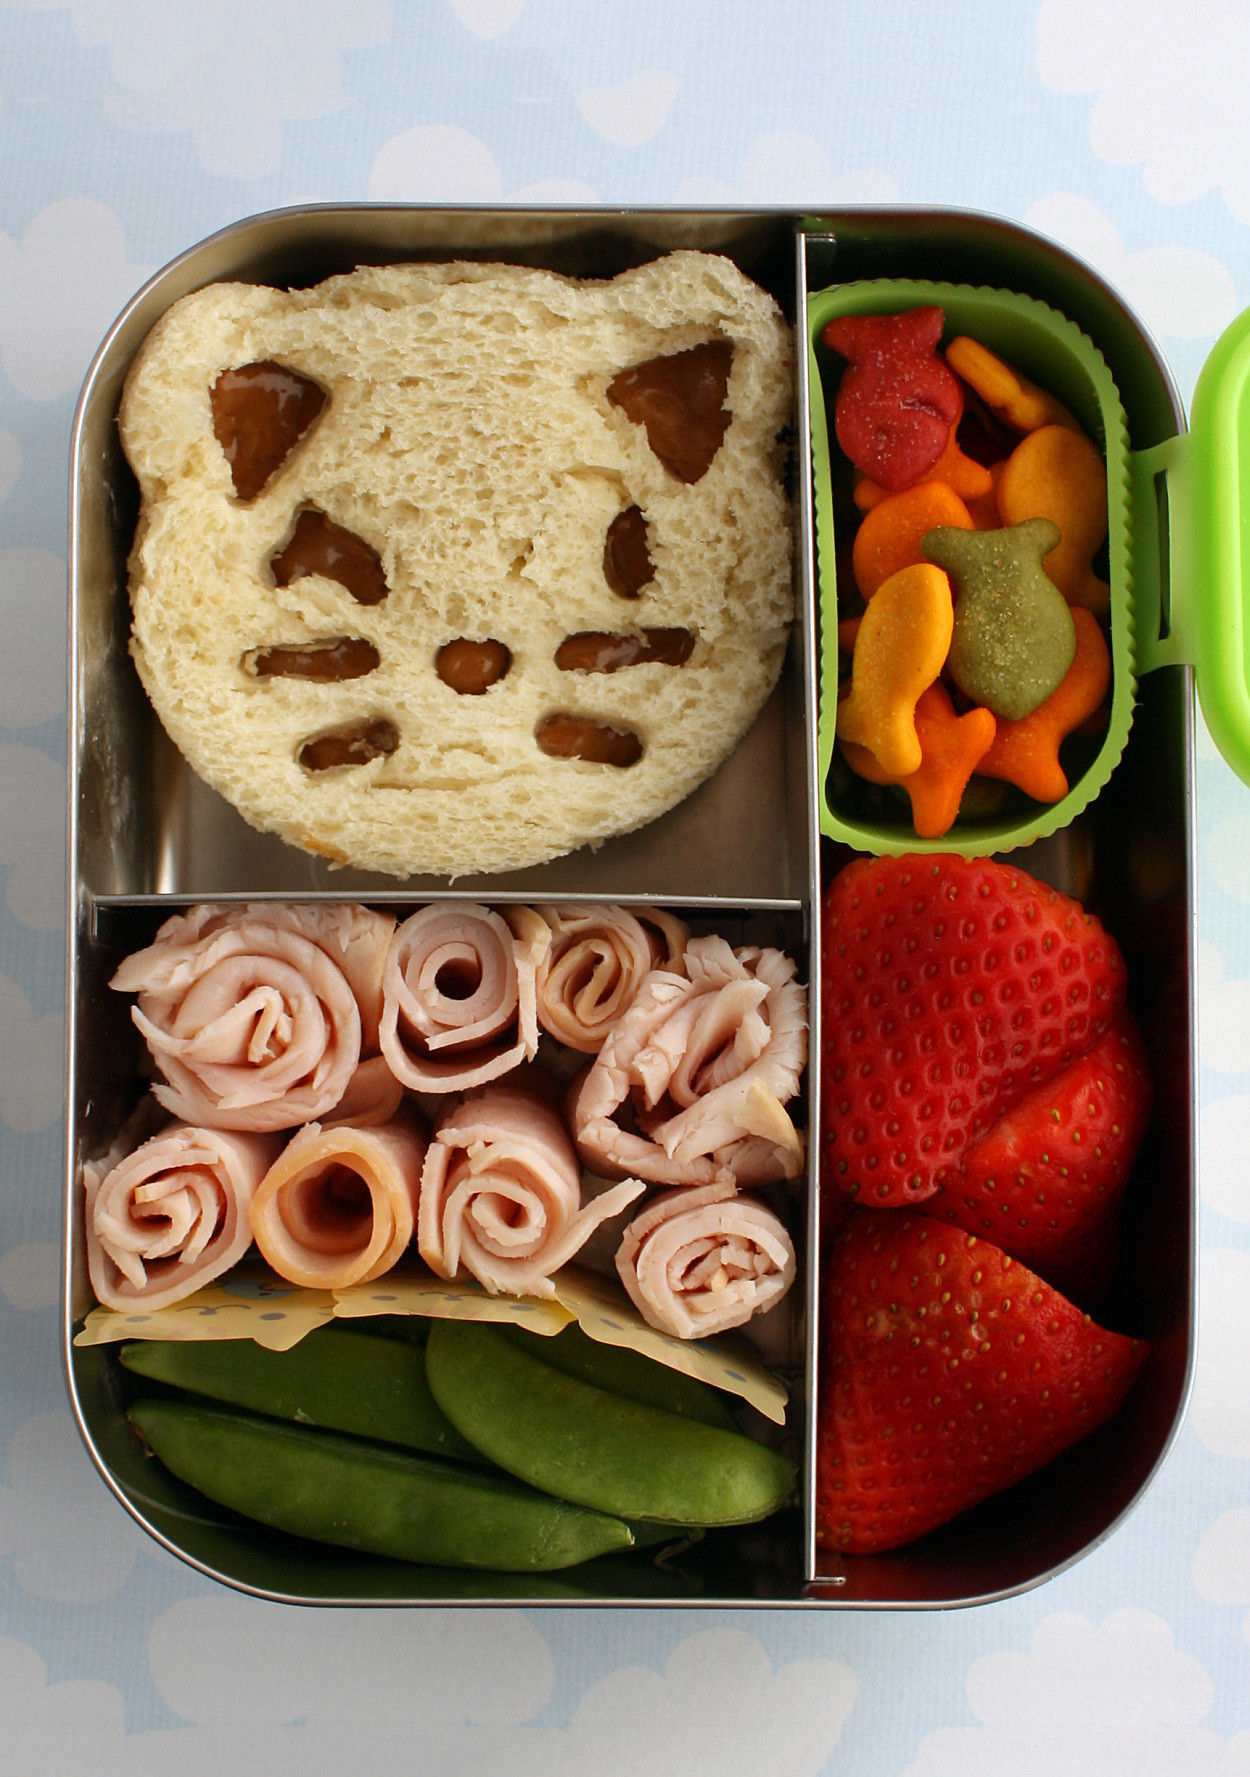 10 Nut-Free Bento Box Ideas to Shake Up Your School Lunch Routine ...